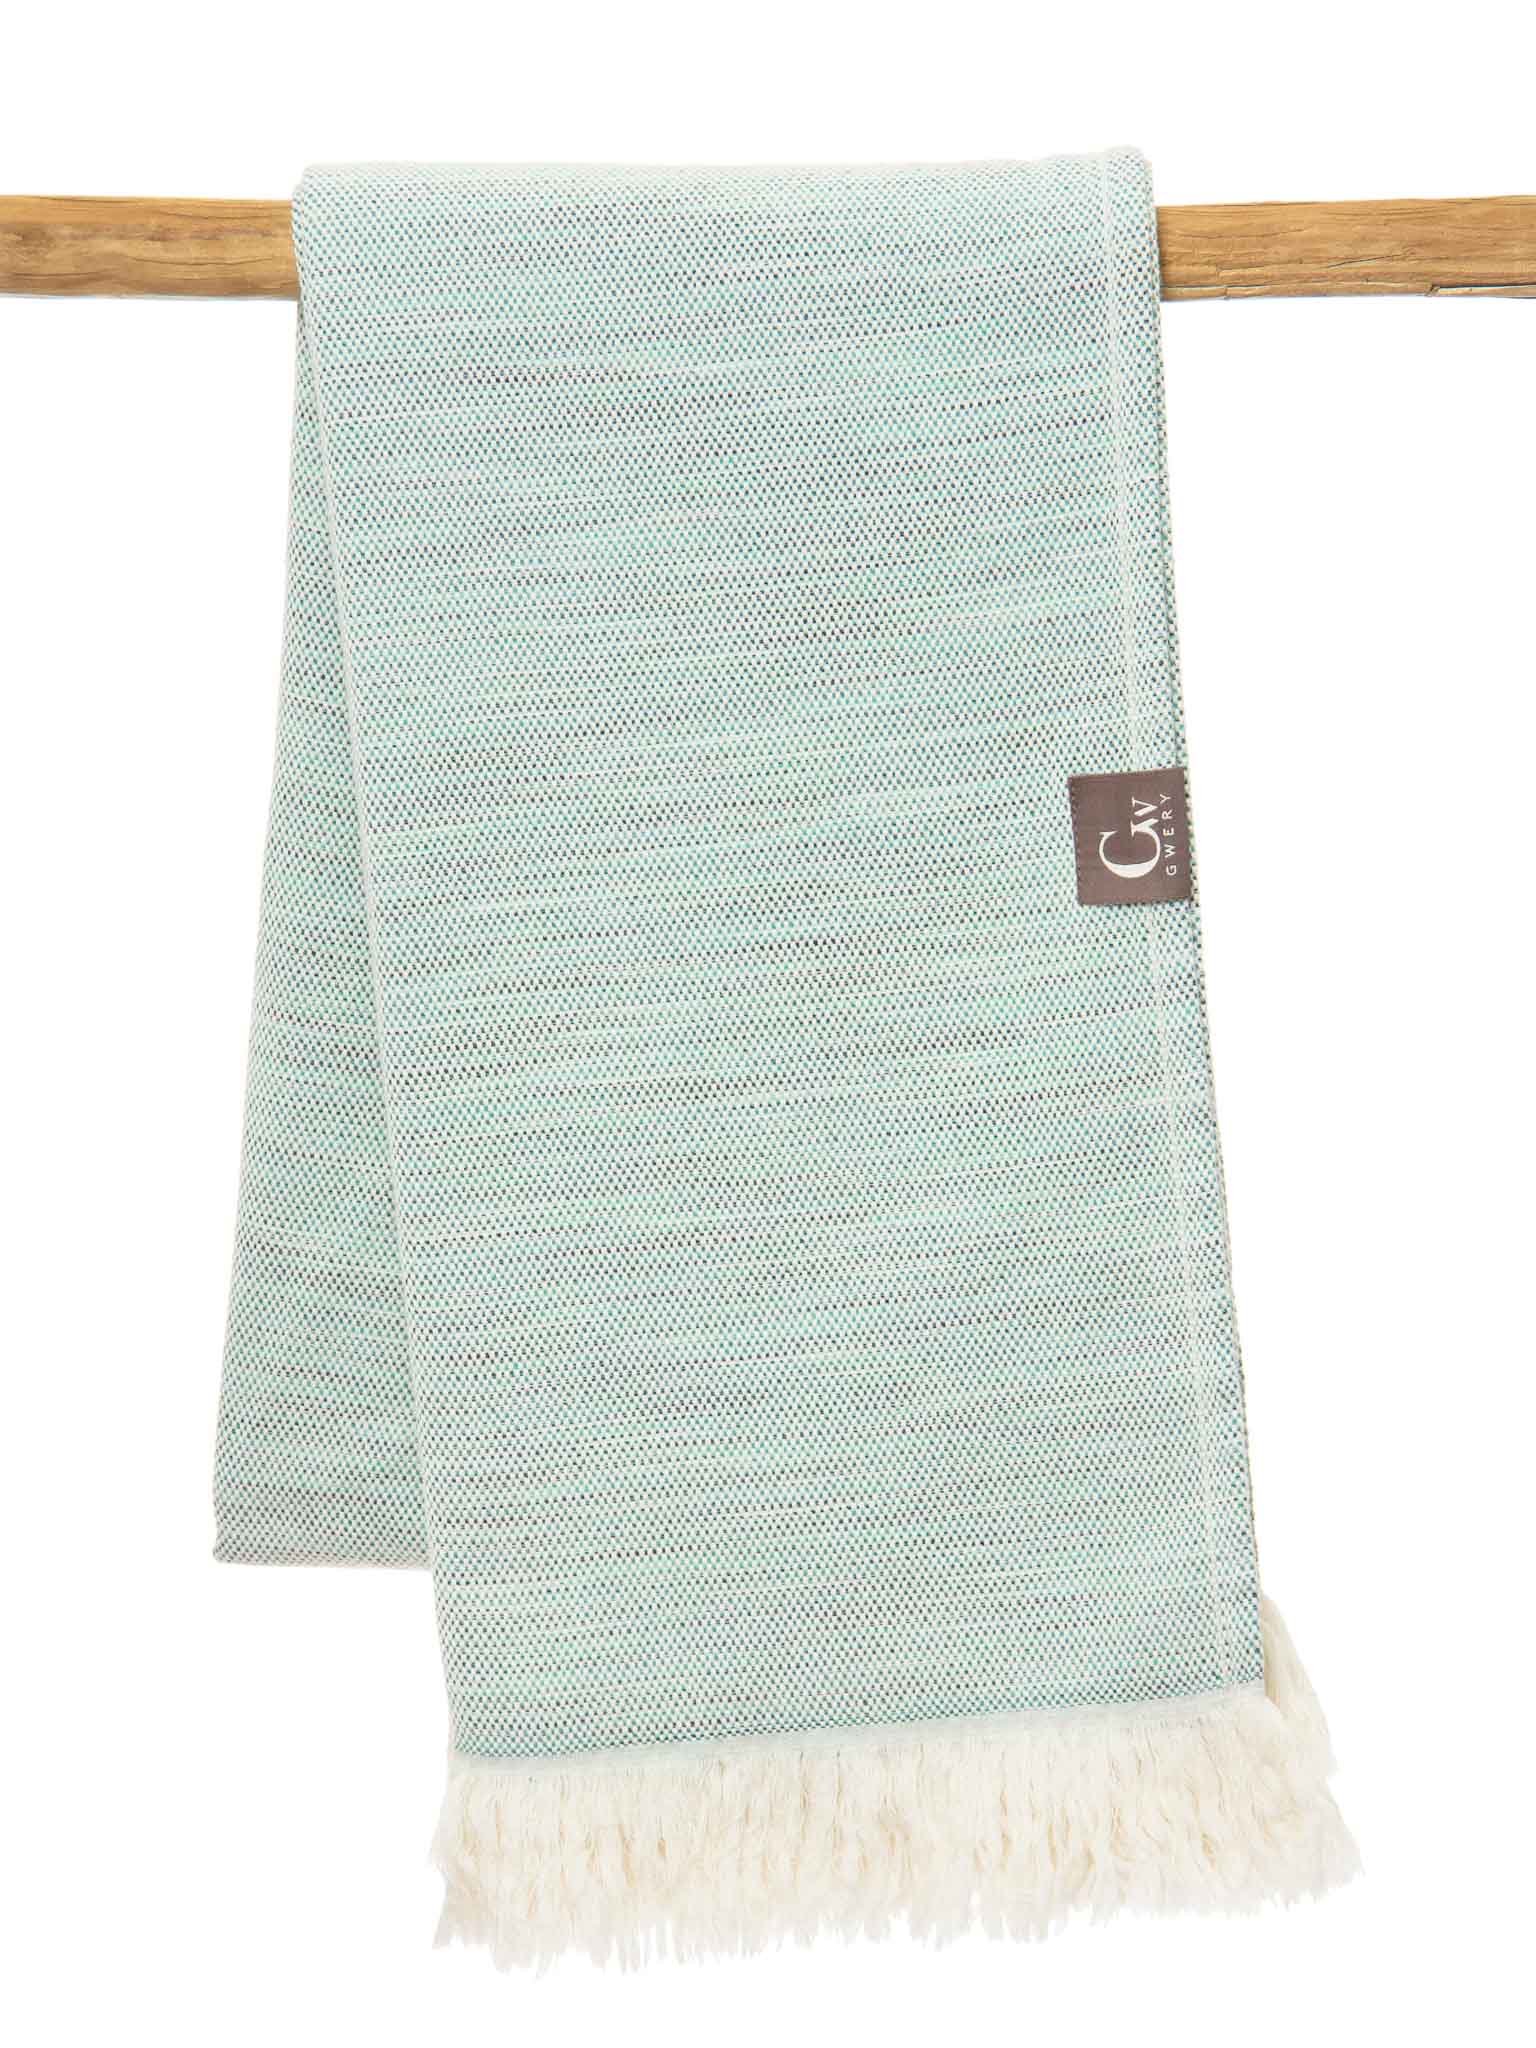 GREEN PATTERNED FEATHER XL BEACH TOWEL